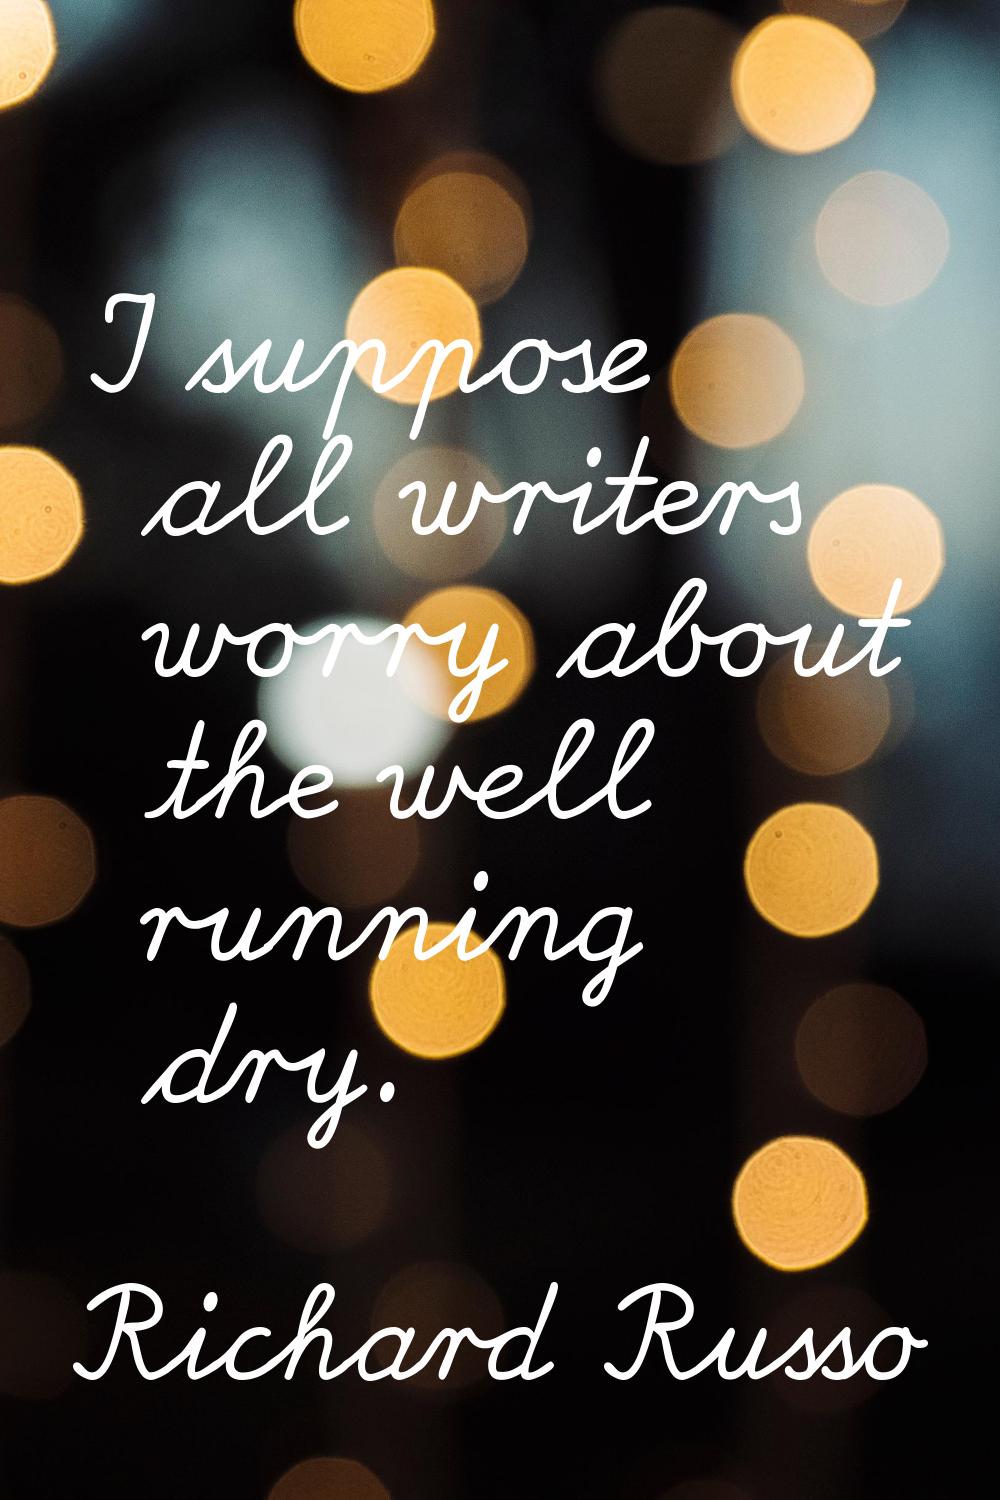 I suppose all writers worry about the well running dry.